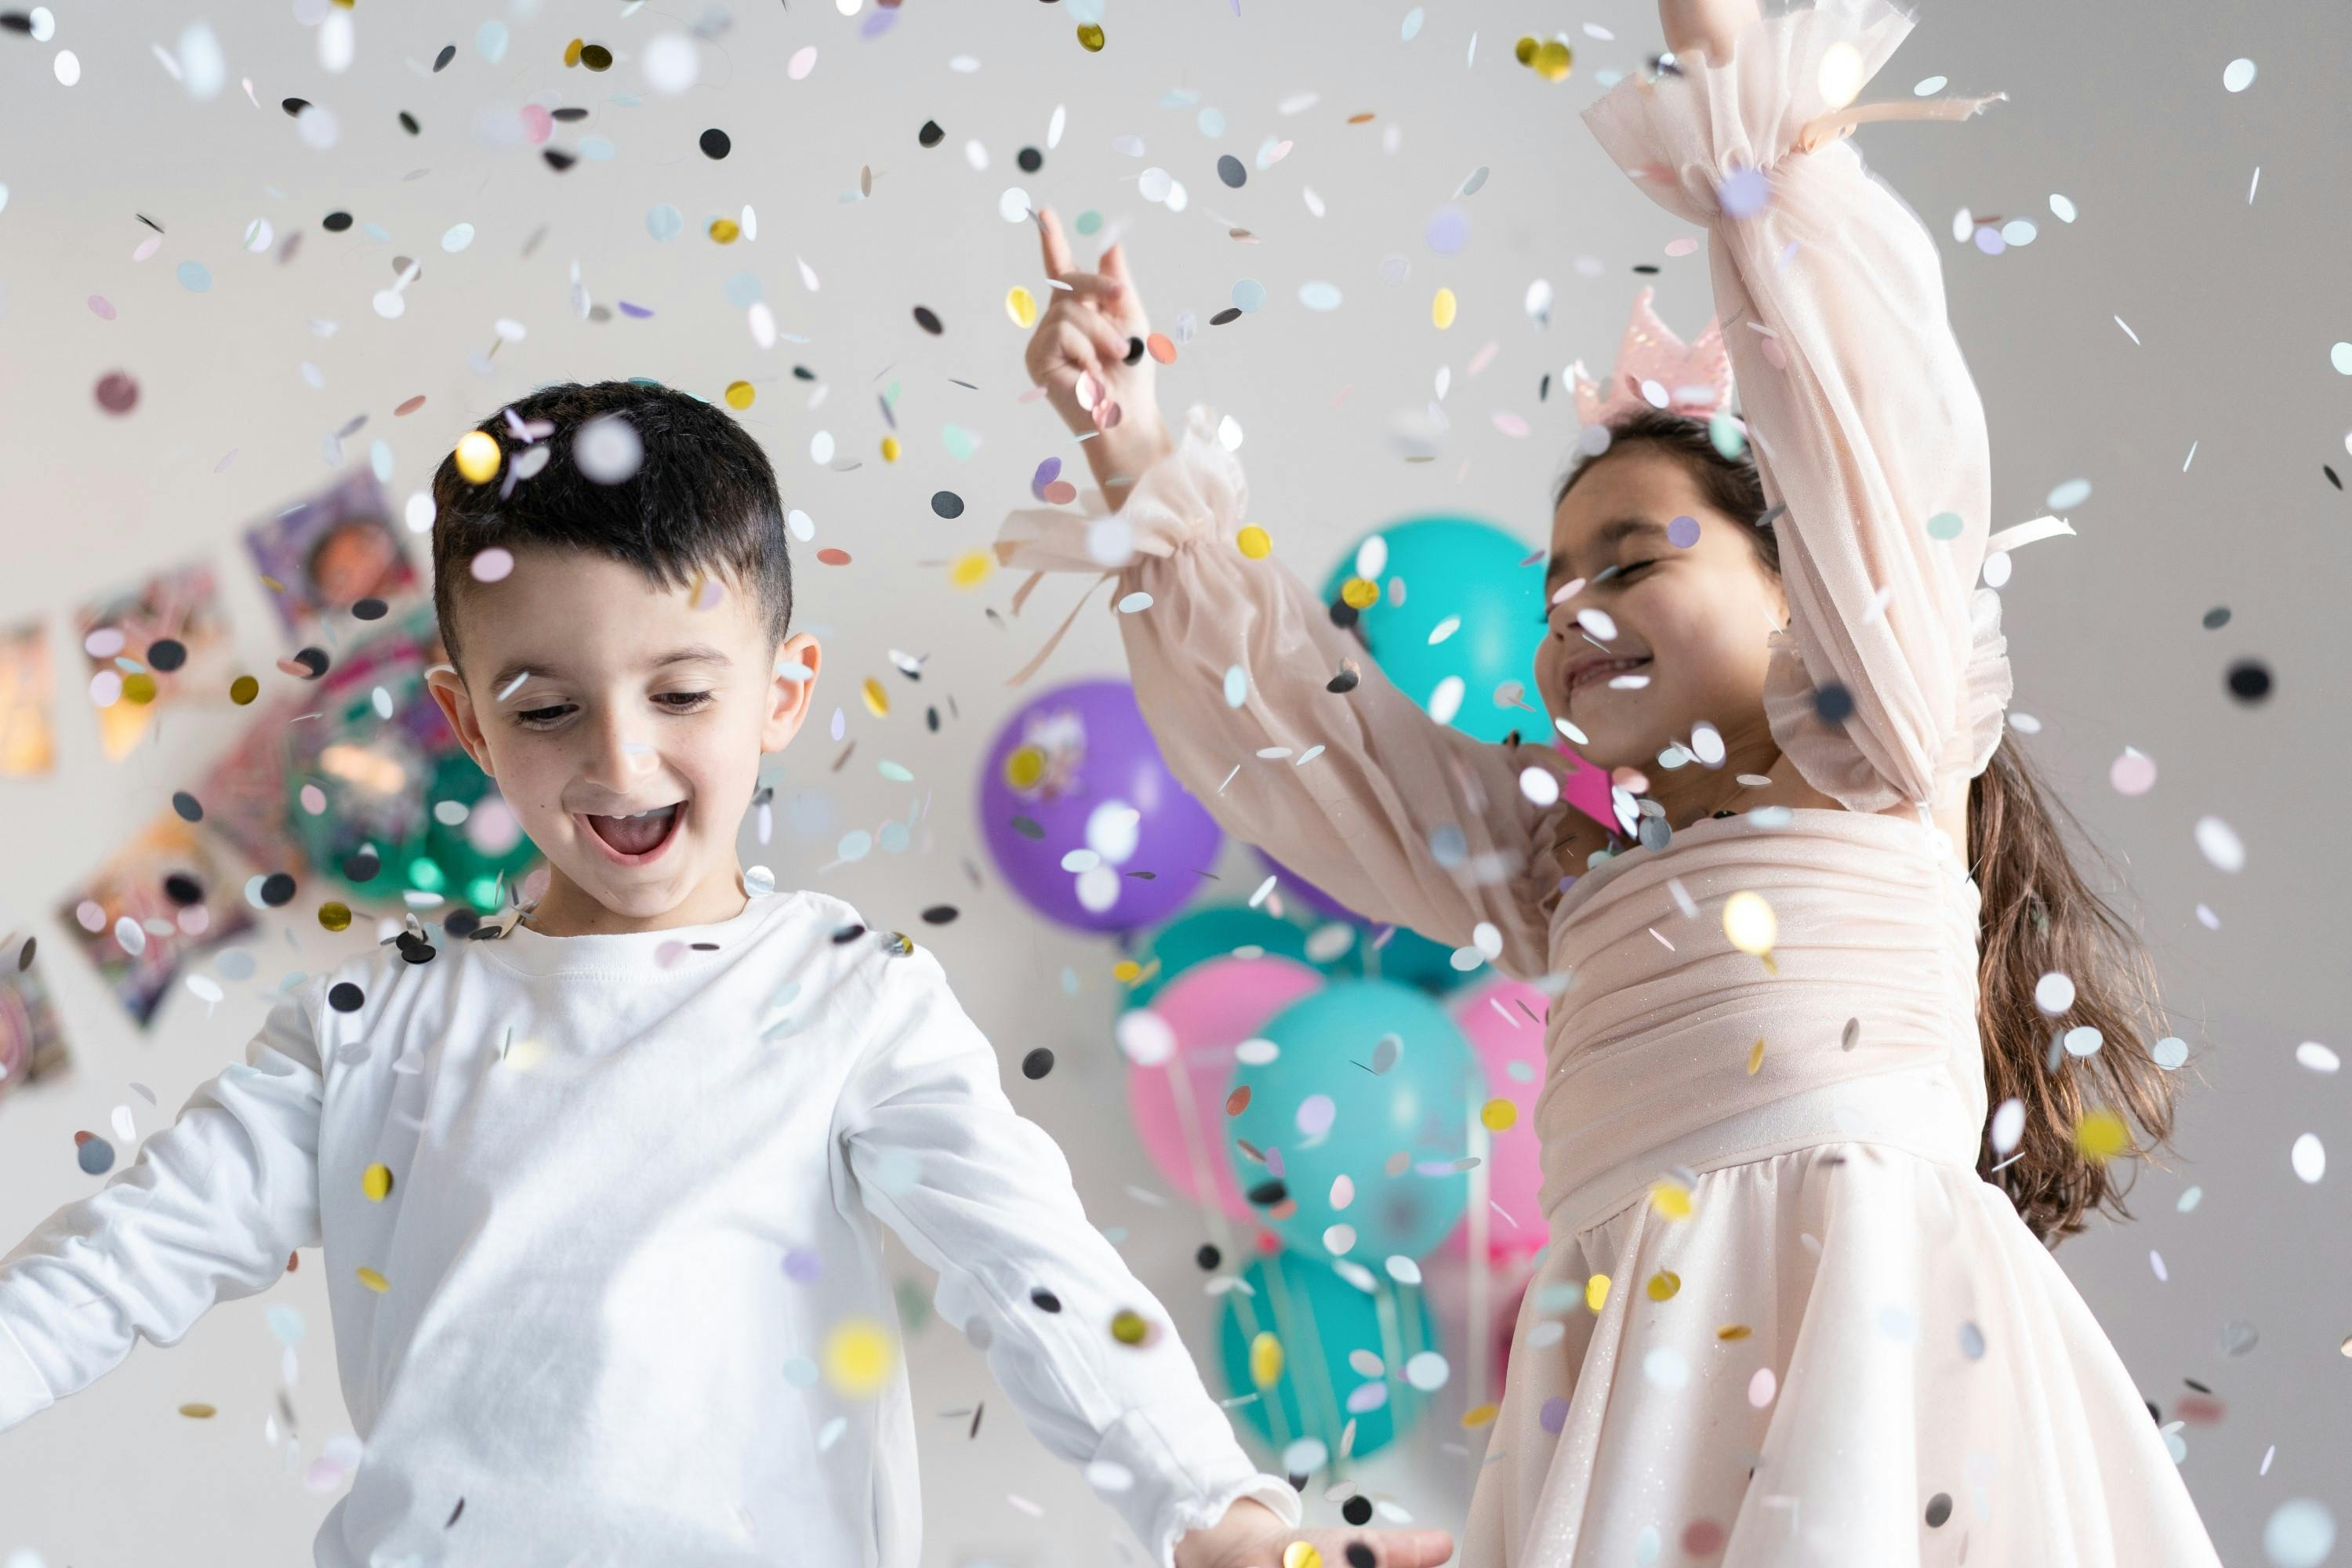 A young boy and girl around 7 years old, dancing happily in white and gold confetti. There are balloons and bunting in the background. The girl wears a pale pink party dress and has her hands in the air with delight. 